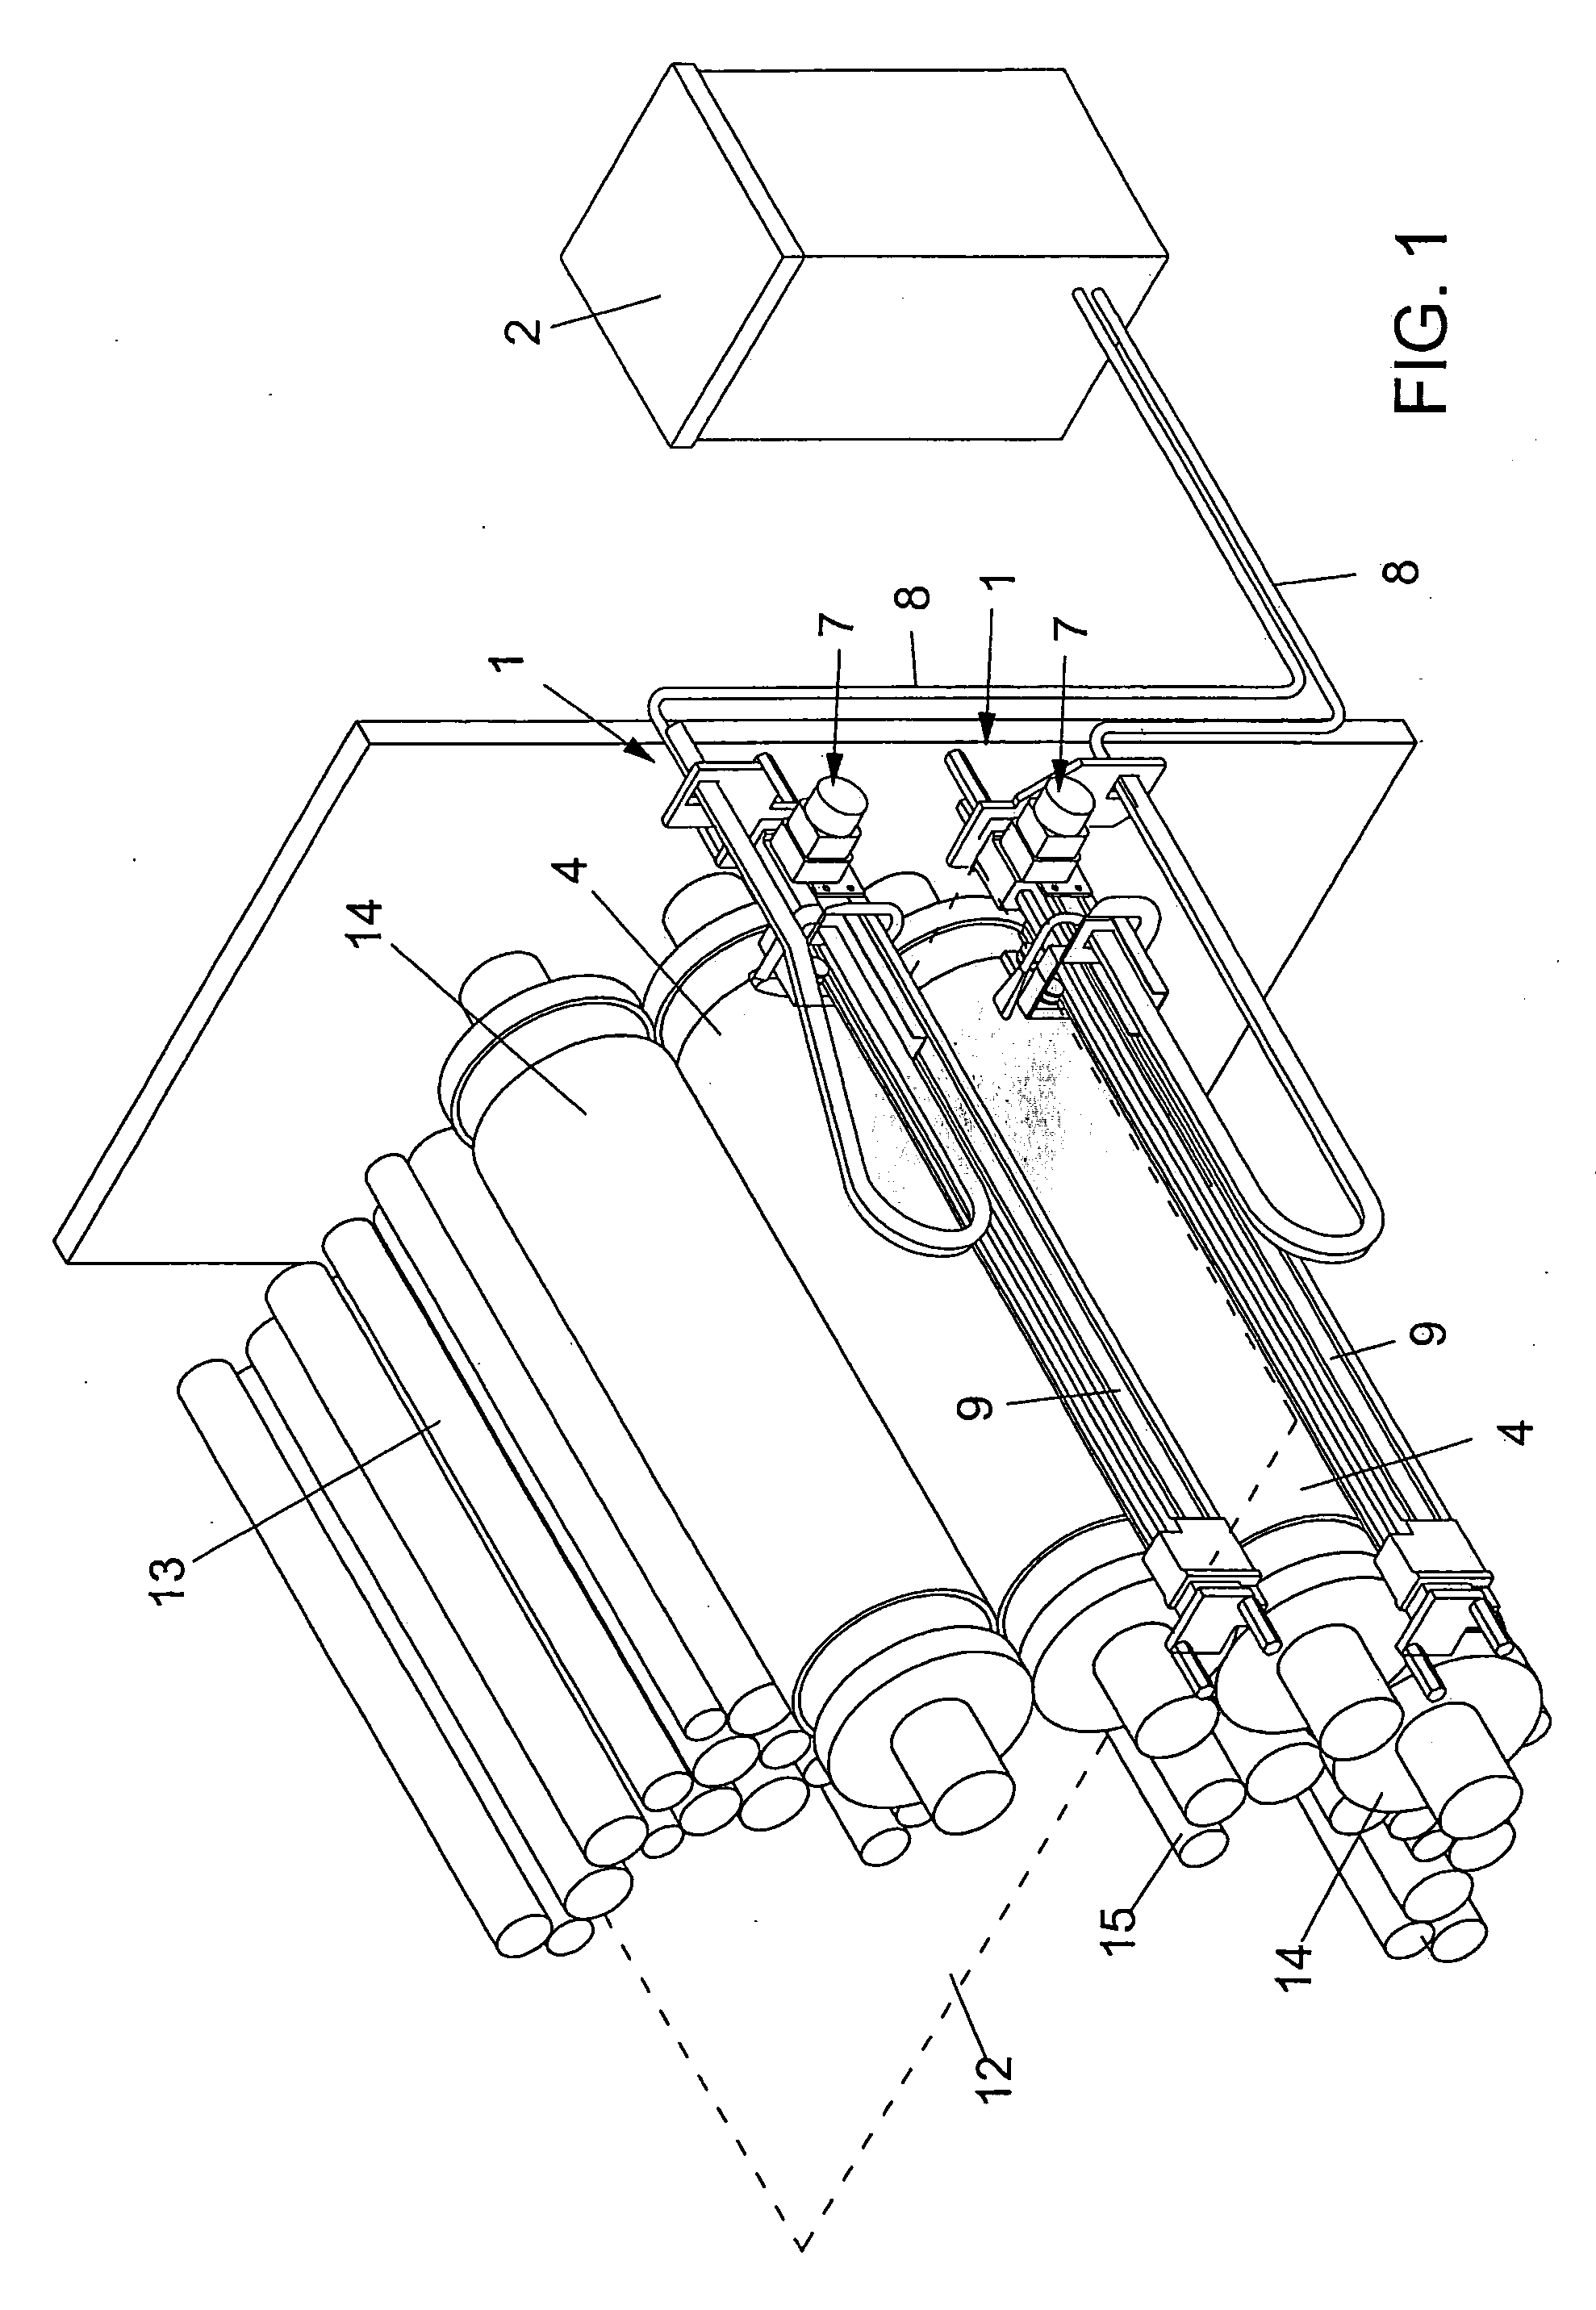 Cleaning apparatus for cleaning priniting machine rotary cylinders